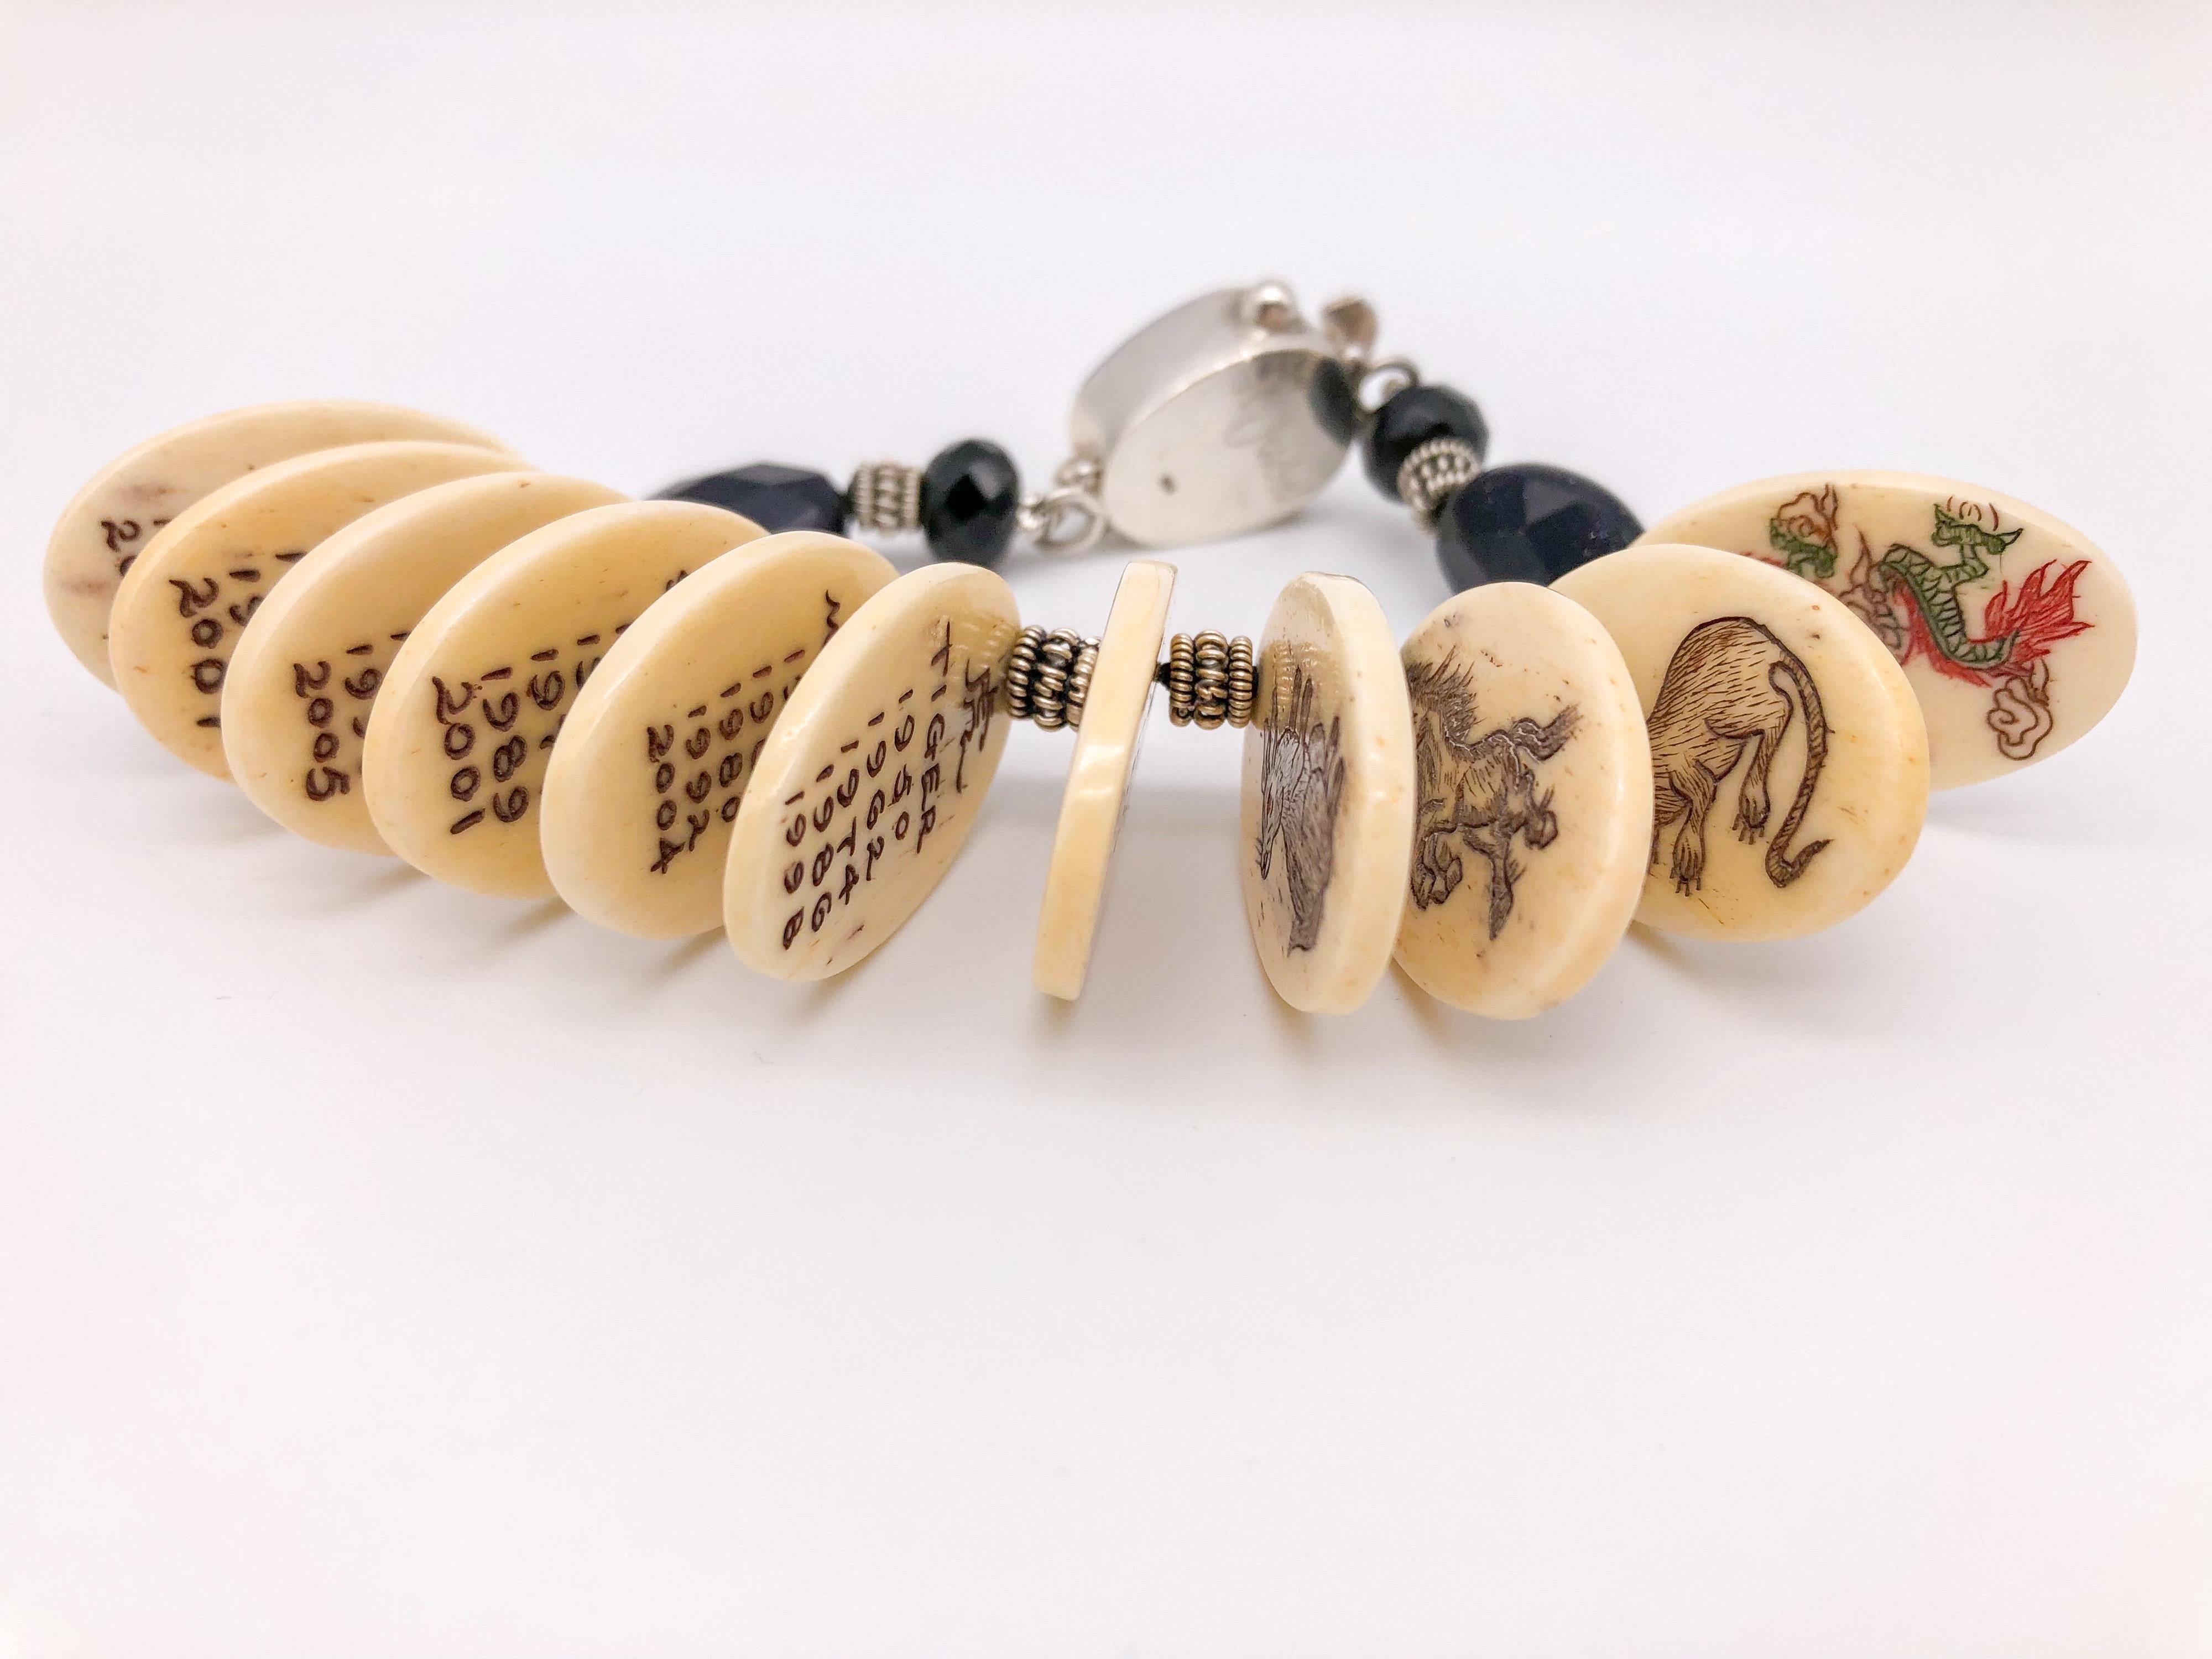 One-of-a-Kind
An incredible bracelet featuring 12 different animals representing the 12 Chinese Zodiac and year. Each oval bone is hand-painted, the handwork is very fine with incredible detailing, Sterling Silver spacers, and faceted Onyx beads